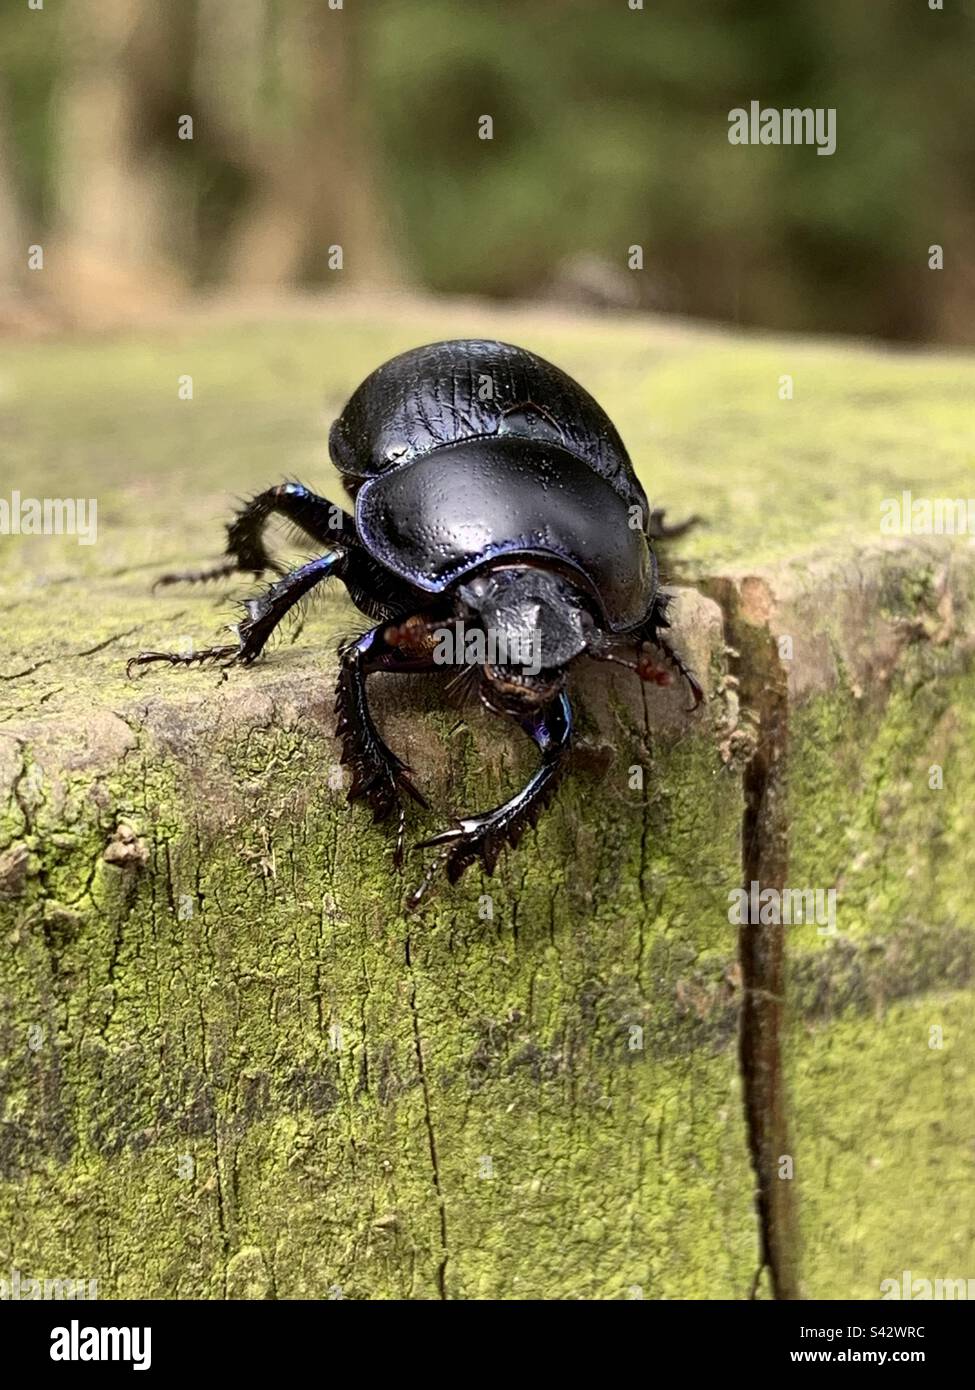 Anoplotrupes stercorosus, the dor beetle, crawling over a mossy wooden post in the new forest, England Stock Photo